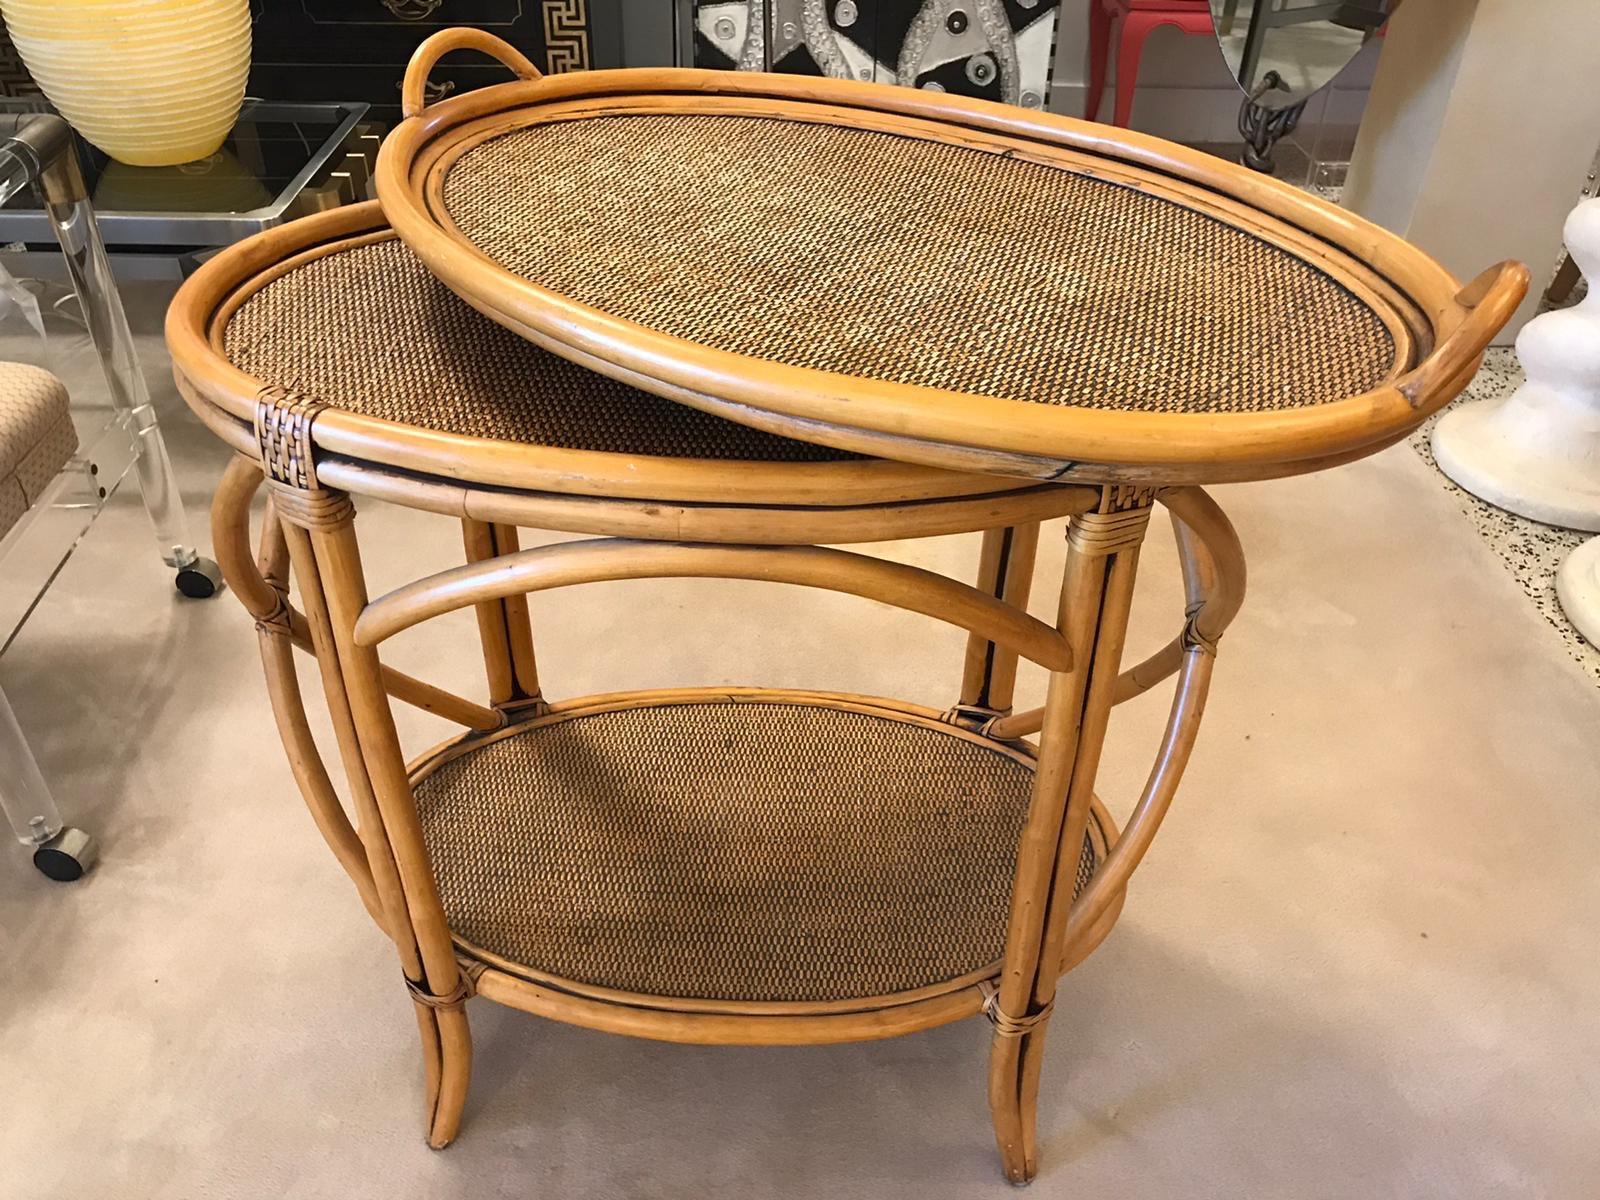 Bent Bamboo and Grasscloth Bar Table with Removable Tray In Good Condition For Sale In East Hampton, NY